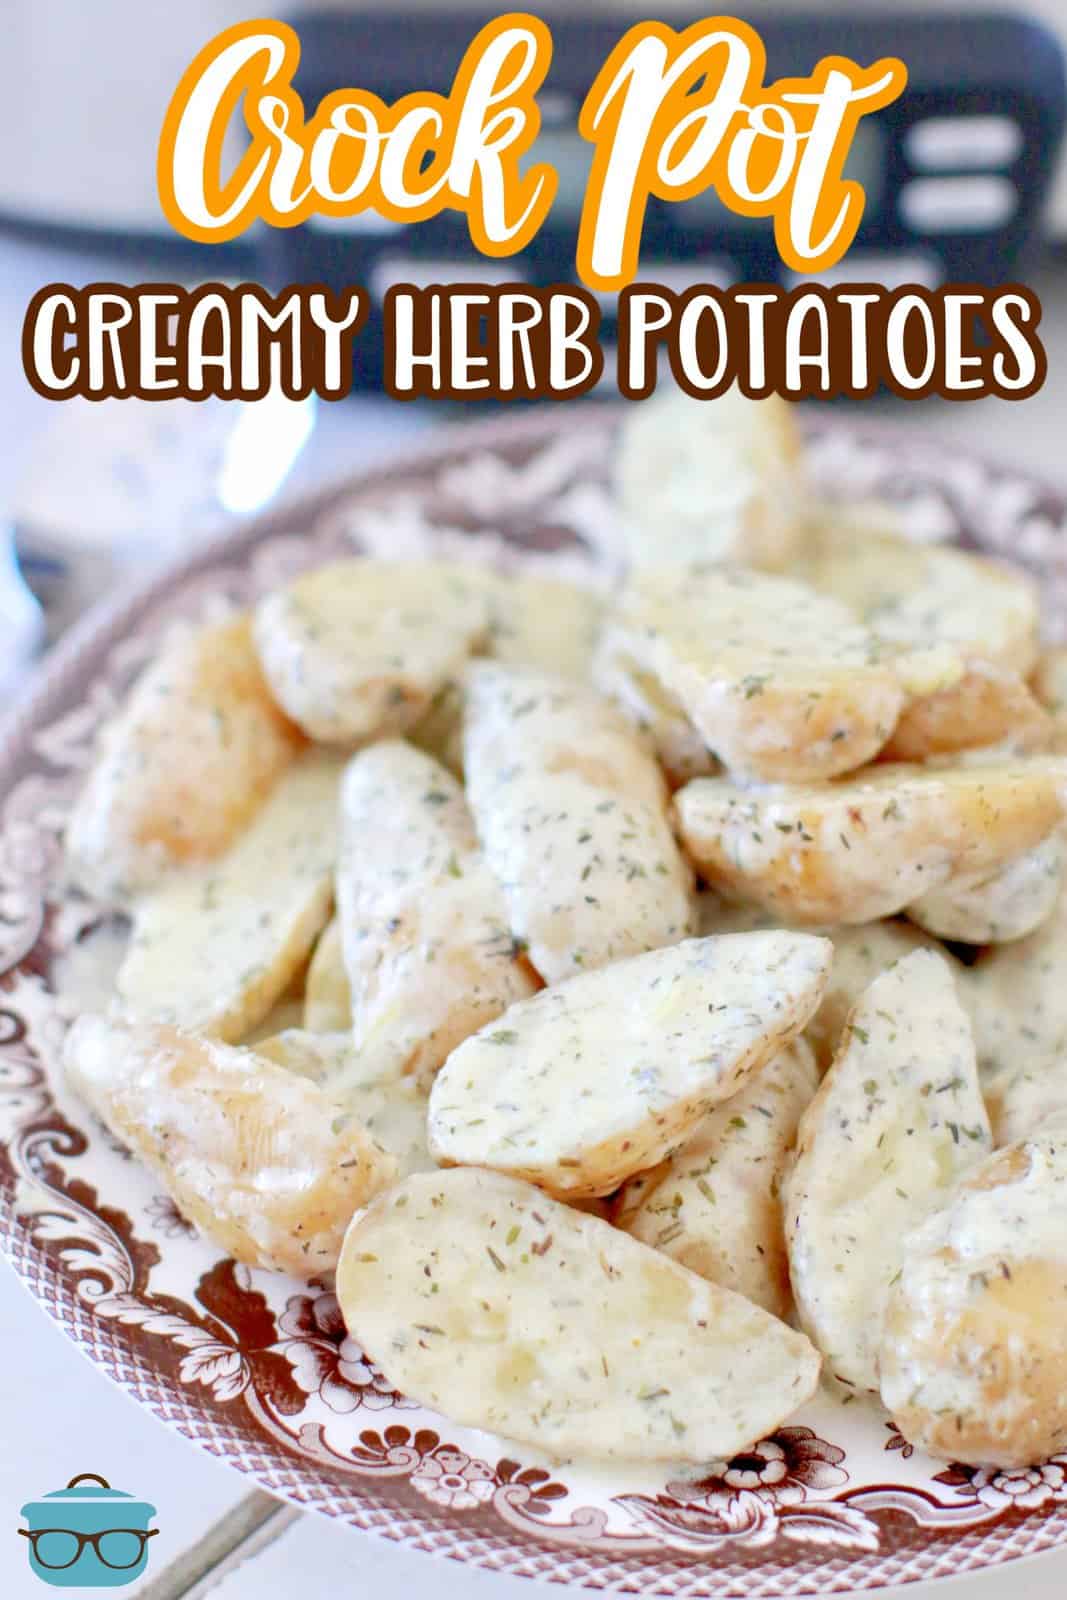 fully cooked sliced fingerling potatoes in a creamy herb sauce shown on a brown and white plate with a slow cooker in the background. 